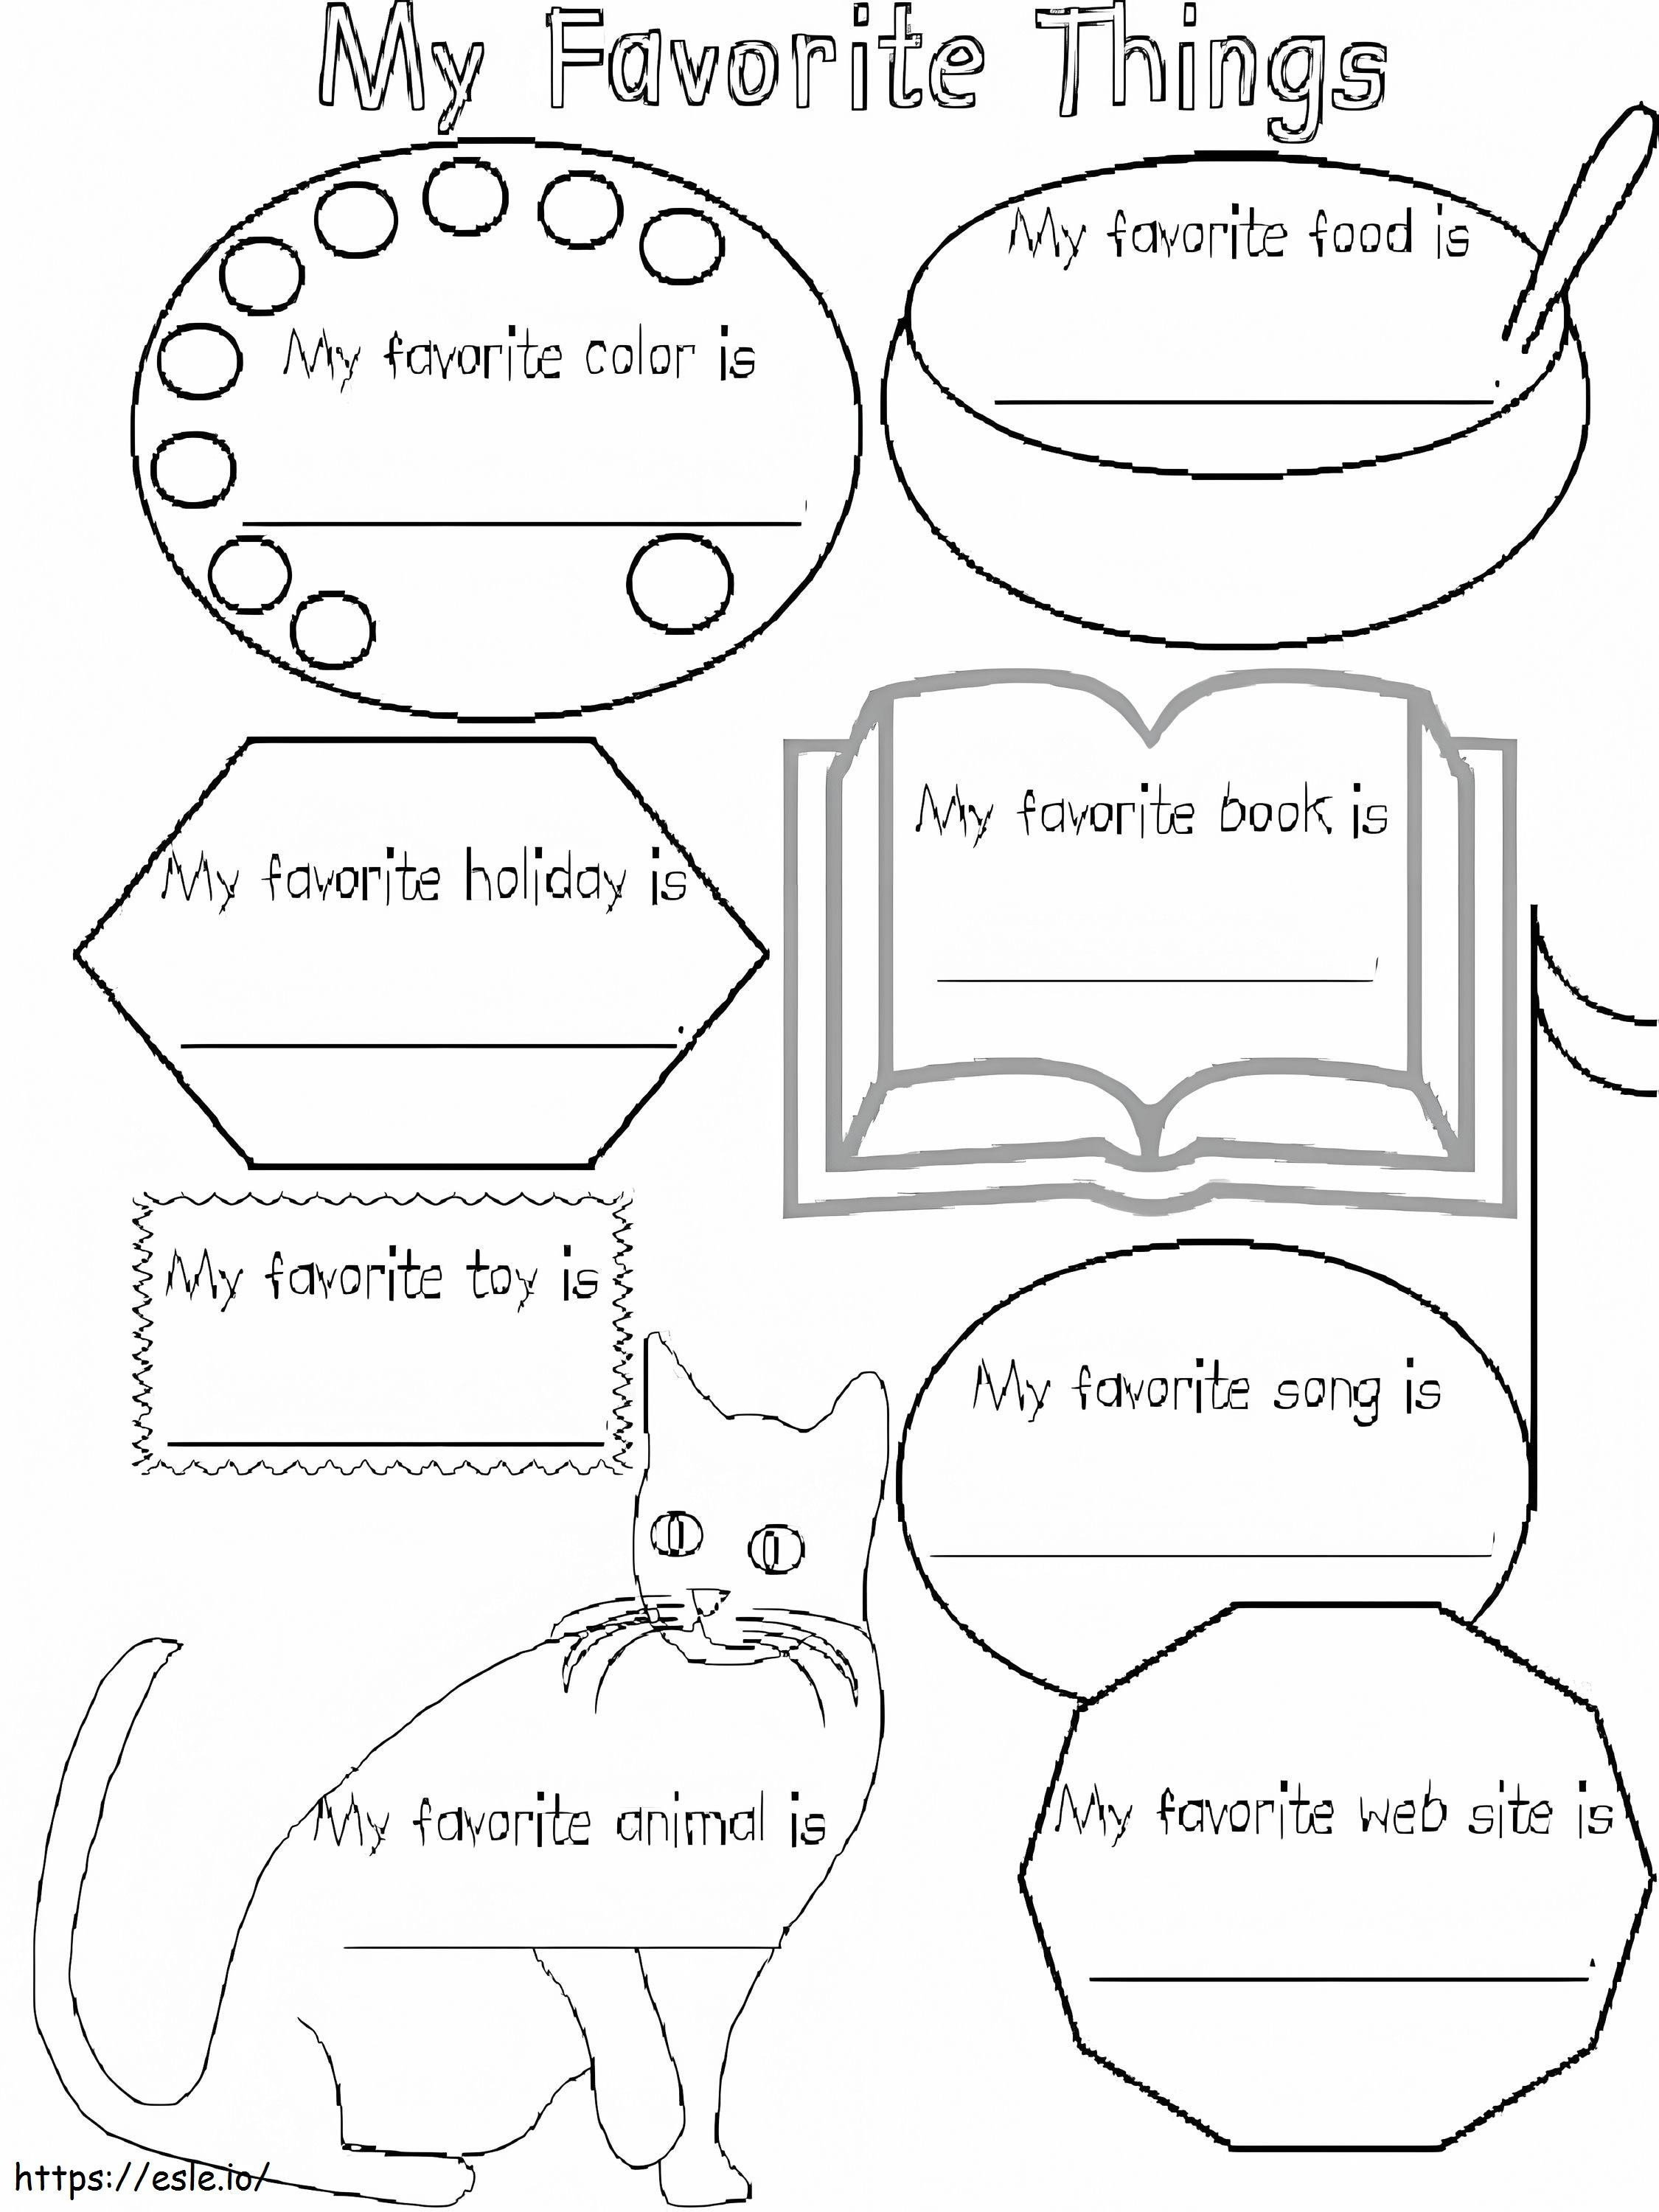 All About Me 7 coloring page